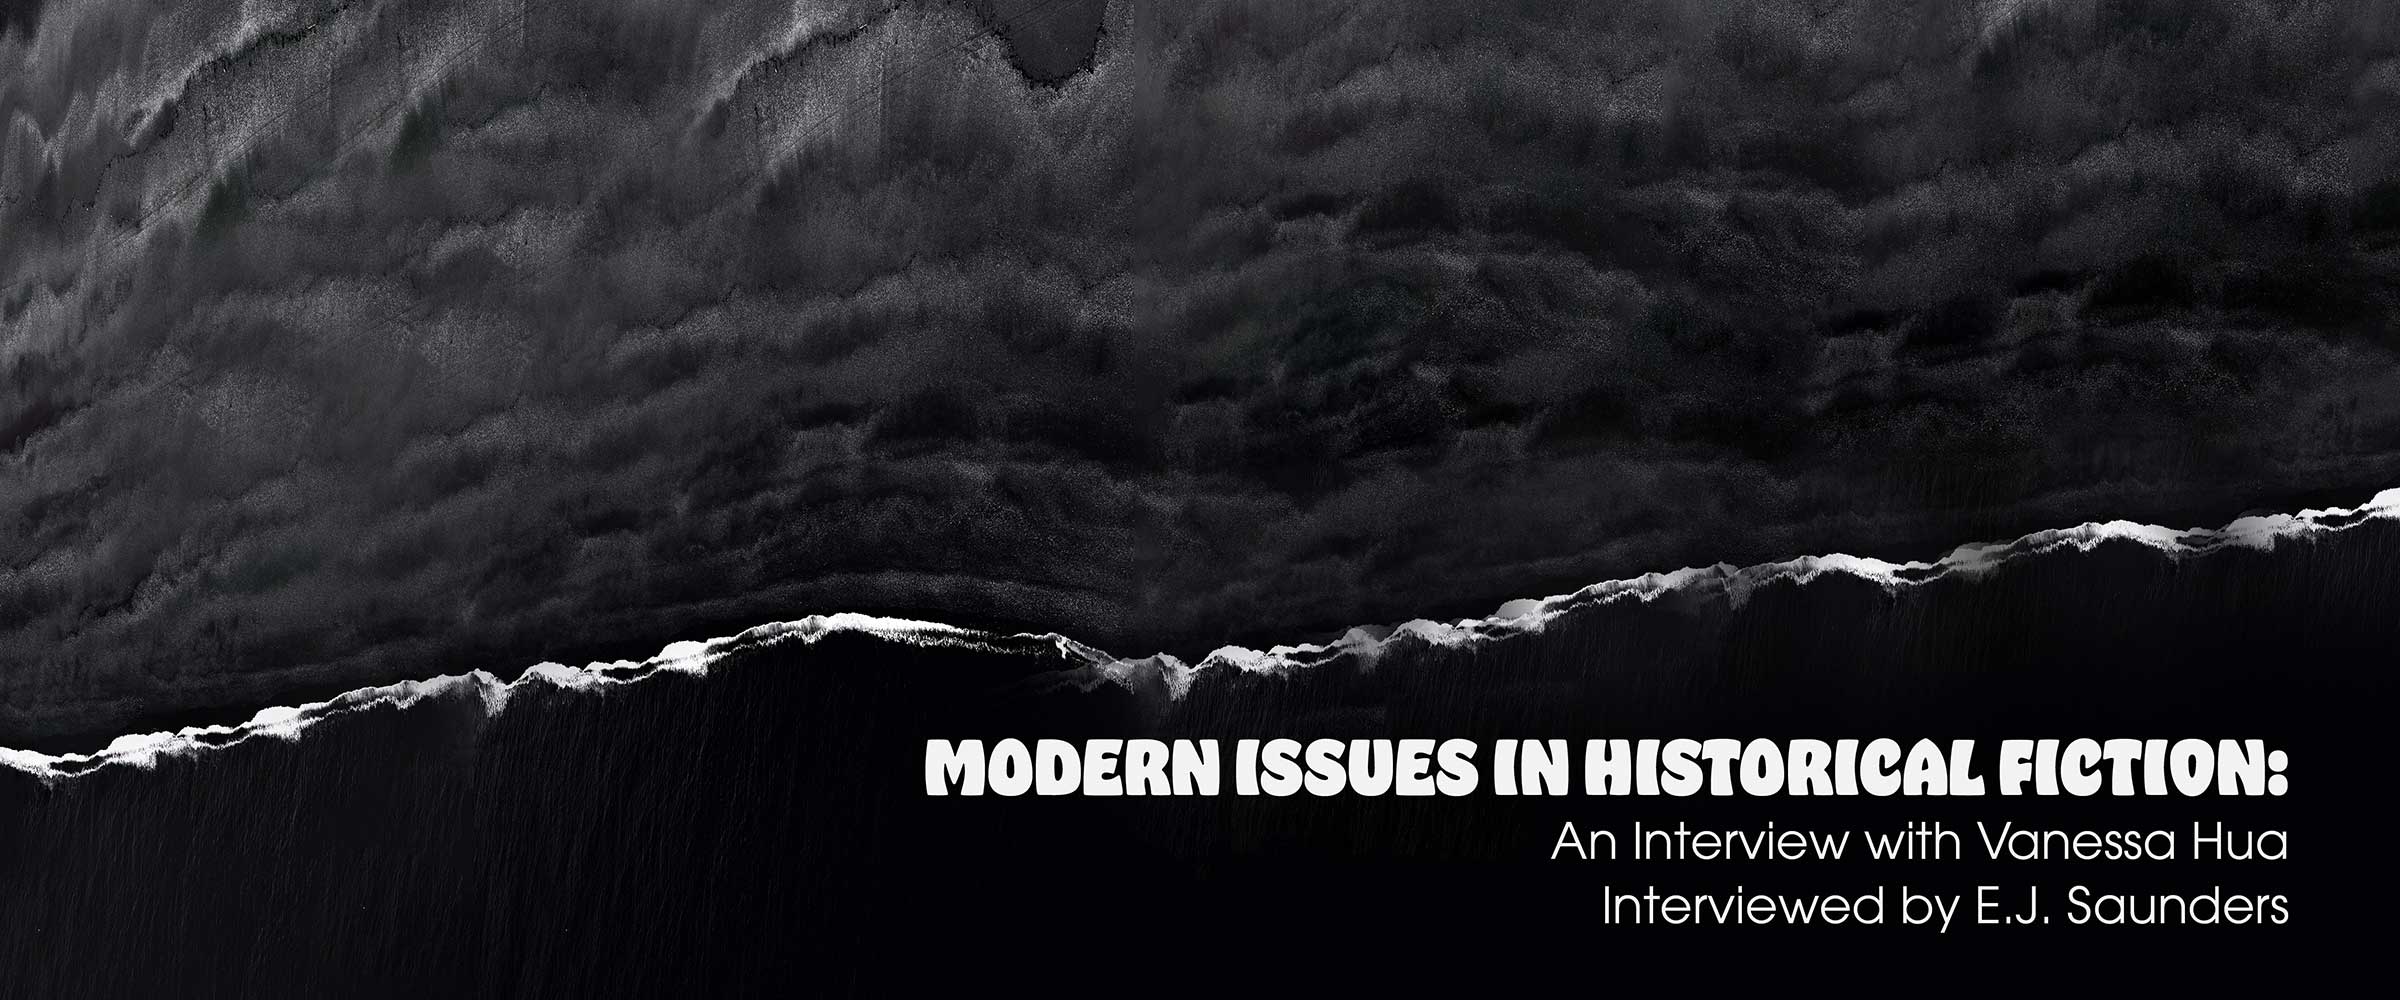 Modern Issues in Historical Fiction: Interview with Vanessa Hua interviewed by EJ Saunders; abstract graphic in black and white reminiscent of clouds, with a dramatic torn line.